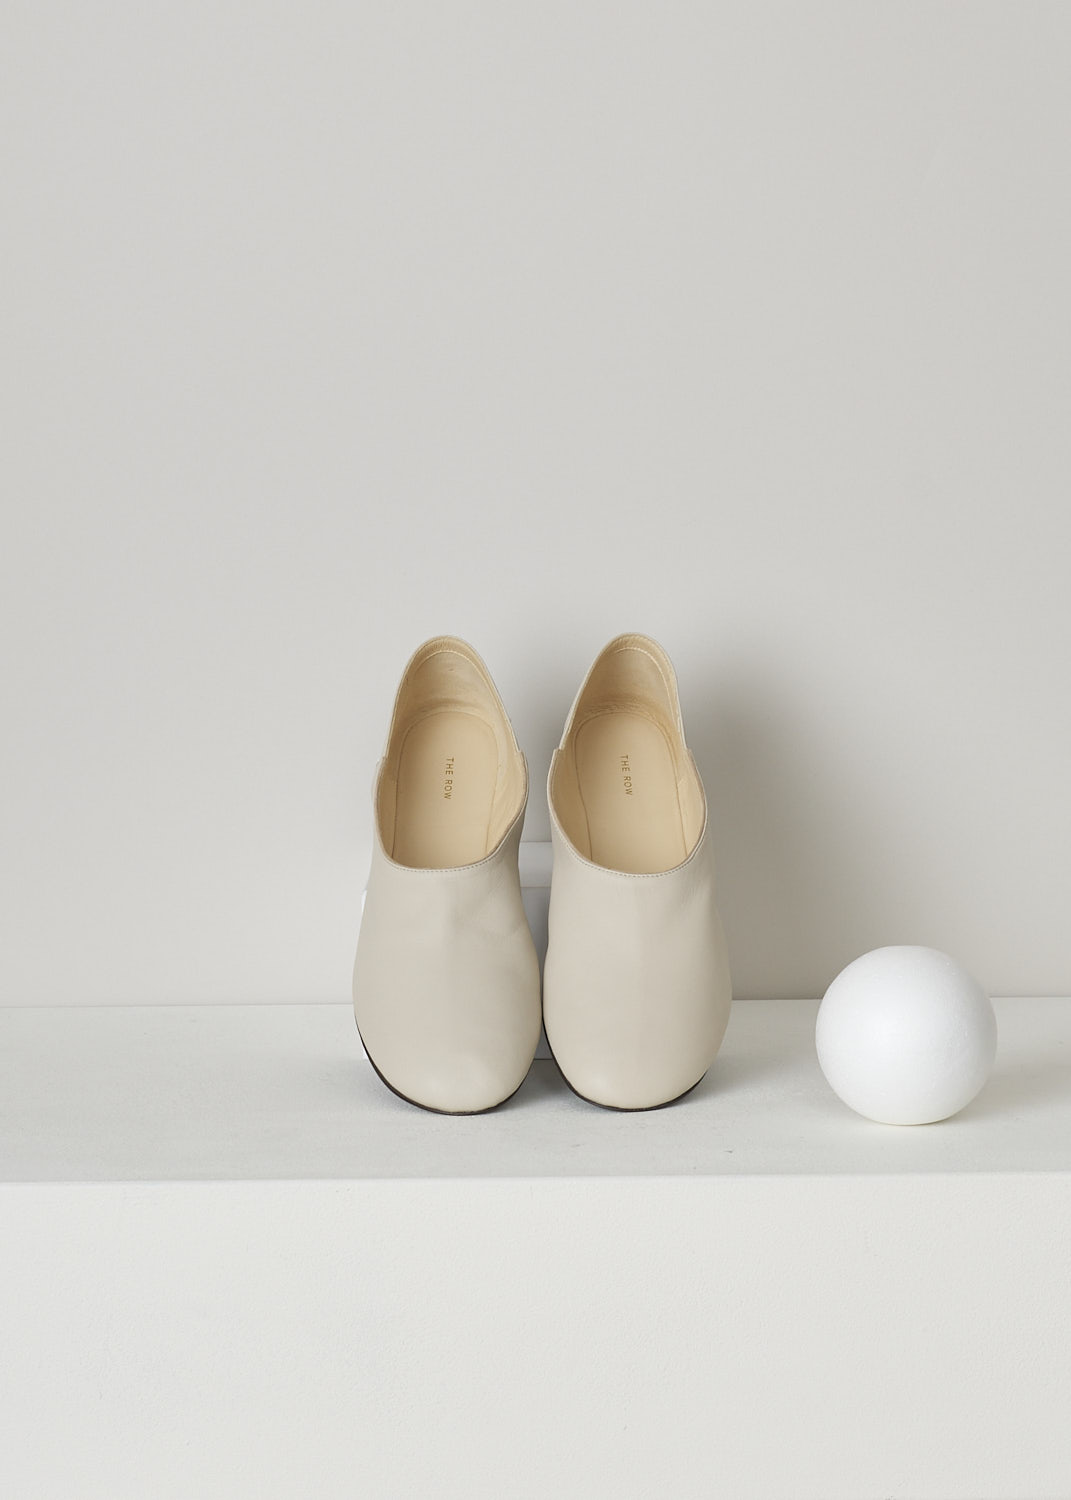 THE ROW, PEARL GREY BOHEME SLIPPERS, F1100_N61_PRG_PEARL_GREY, Grey, Beige, Top, These pearl grey Boheme slip-on slippers are made from smooth supple leather. These slippers features a notched detail along the topline and a high rounded toe vamp.
  
